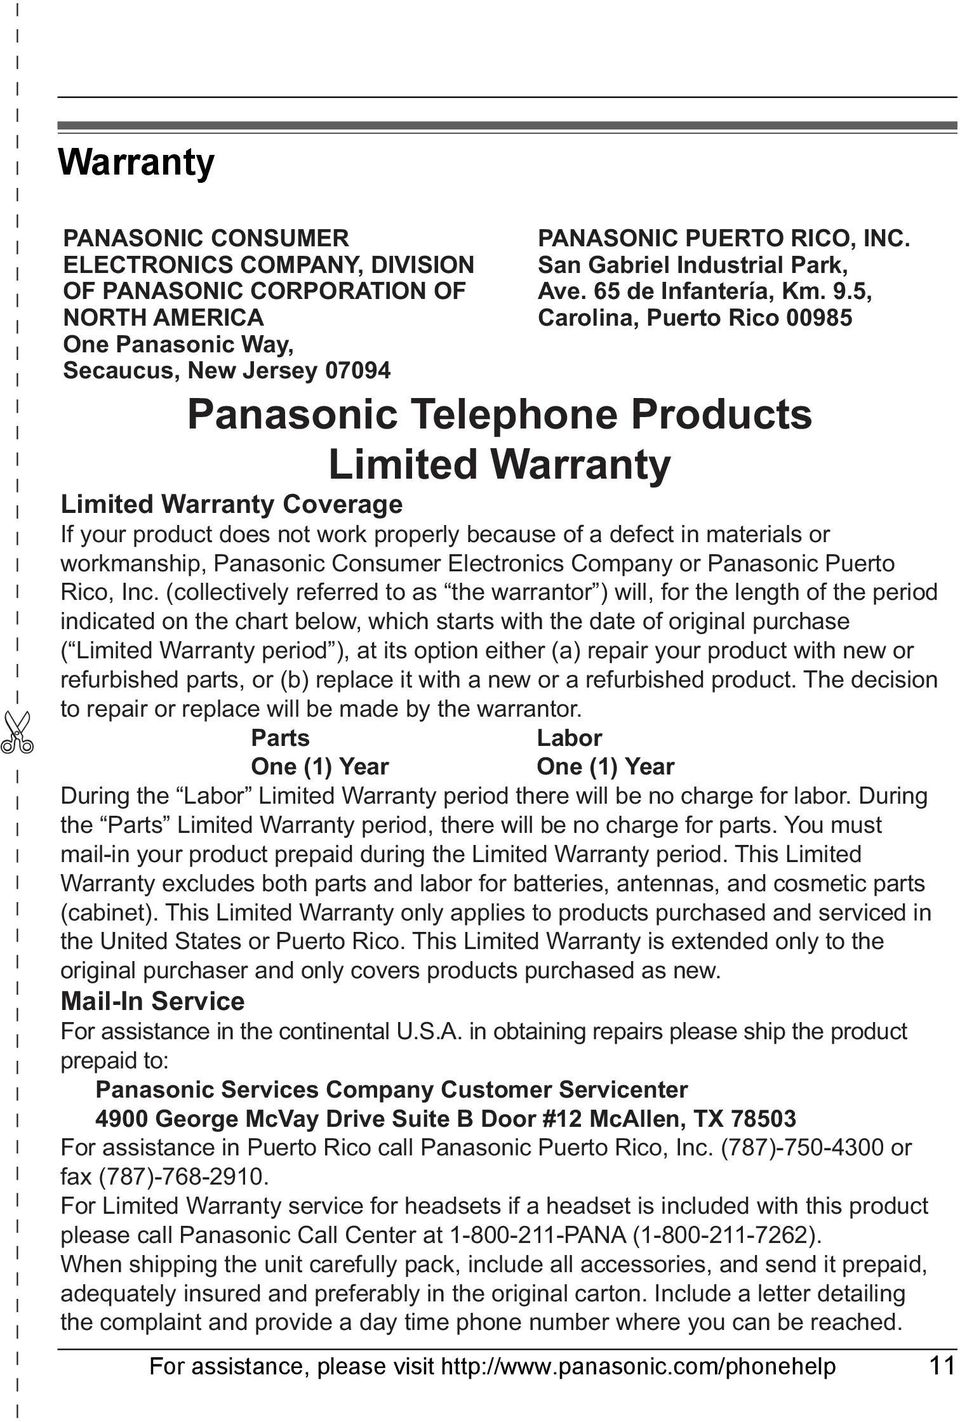 5, Carolina, Puerto Rico 00985 Panasonic Telephone Products Limited Warranty Limited Warranty Coverage If your product does not work properly because of a defect in materials or workmanship,